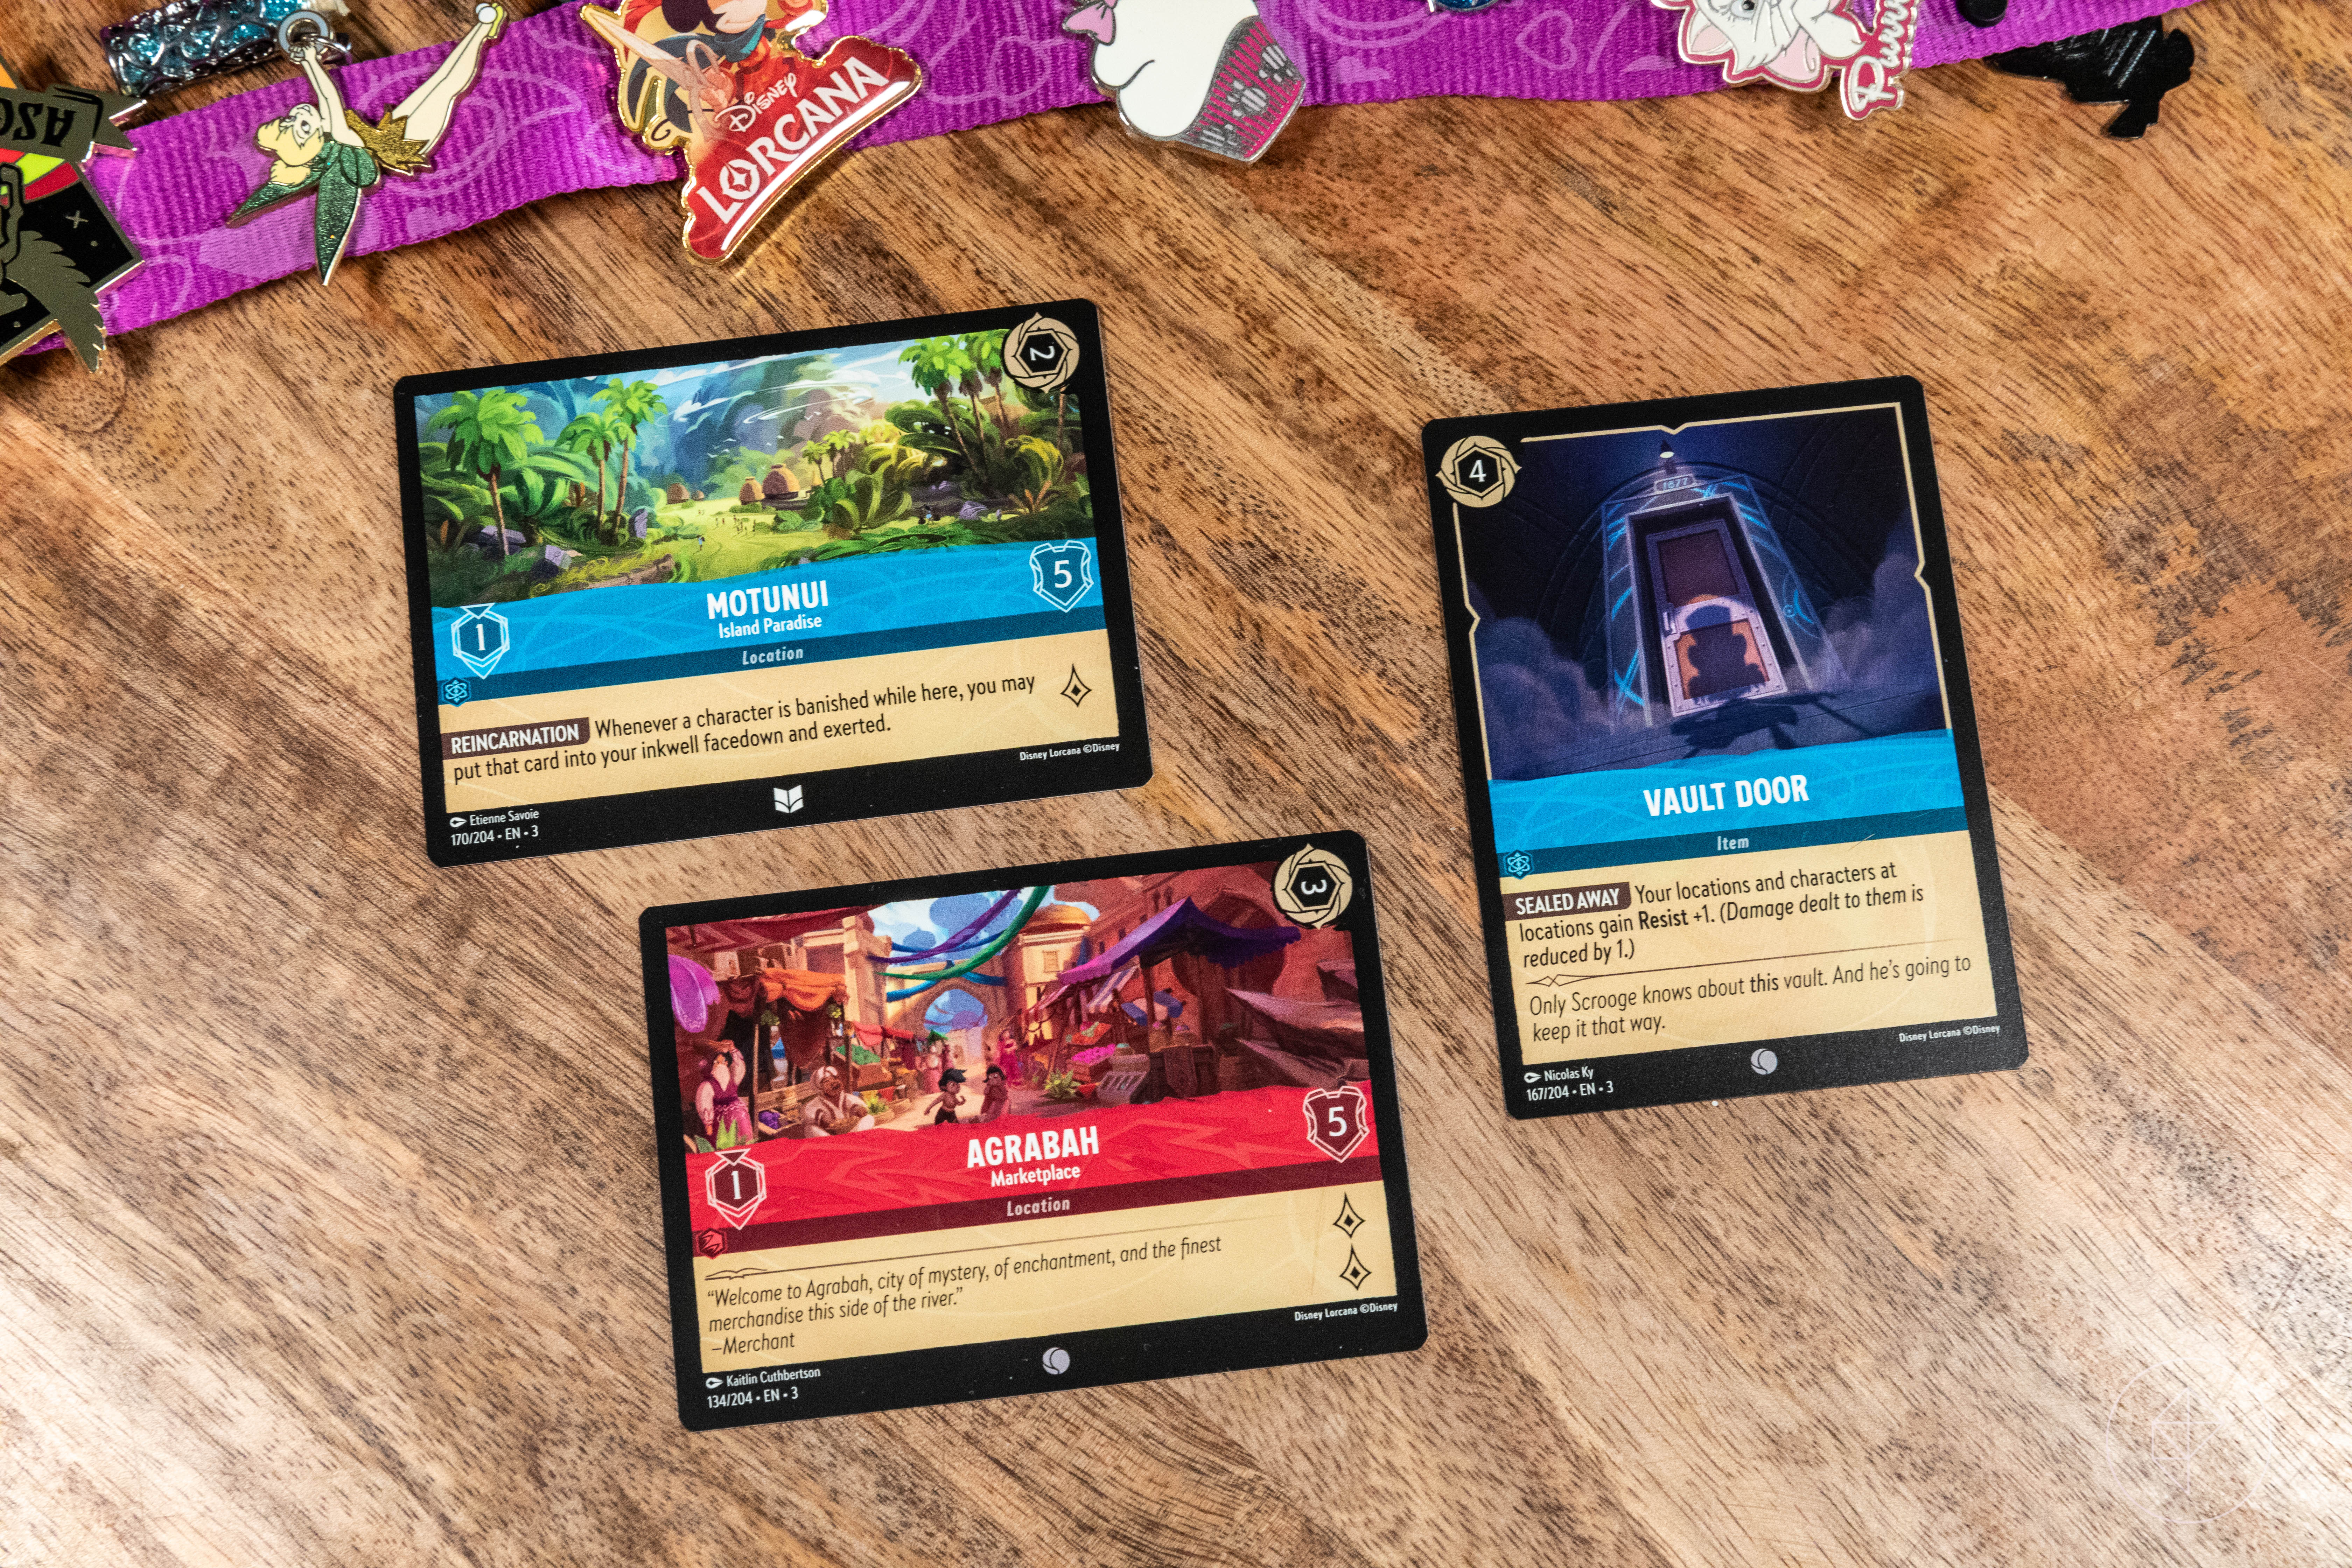 New cards, called location cards, shown here include Motunui and Agrabah. The Vault Door to Scrooge’s money vault is also shown.